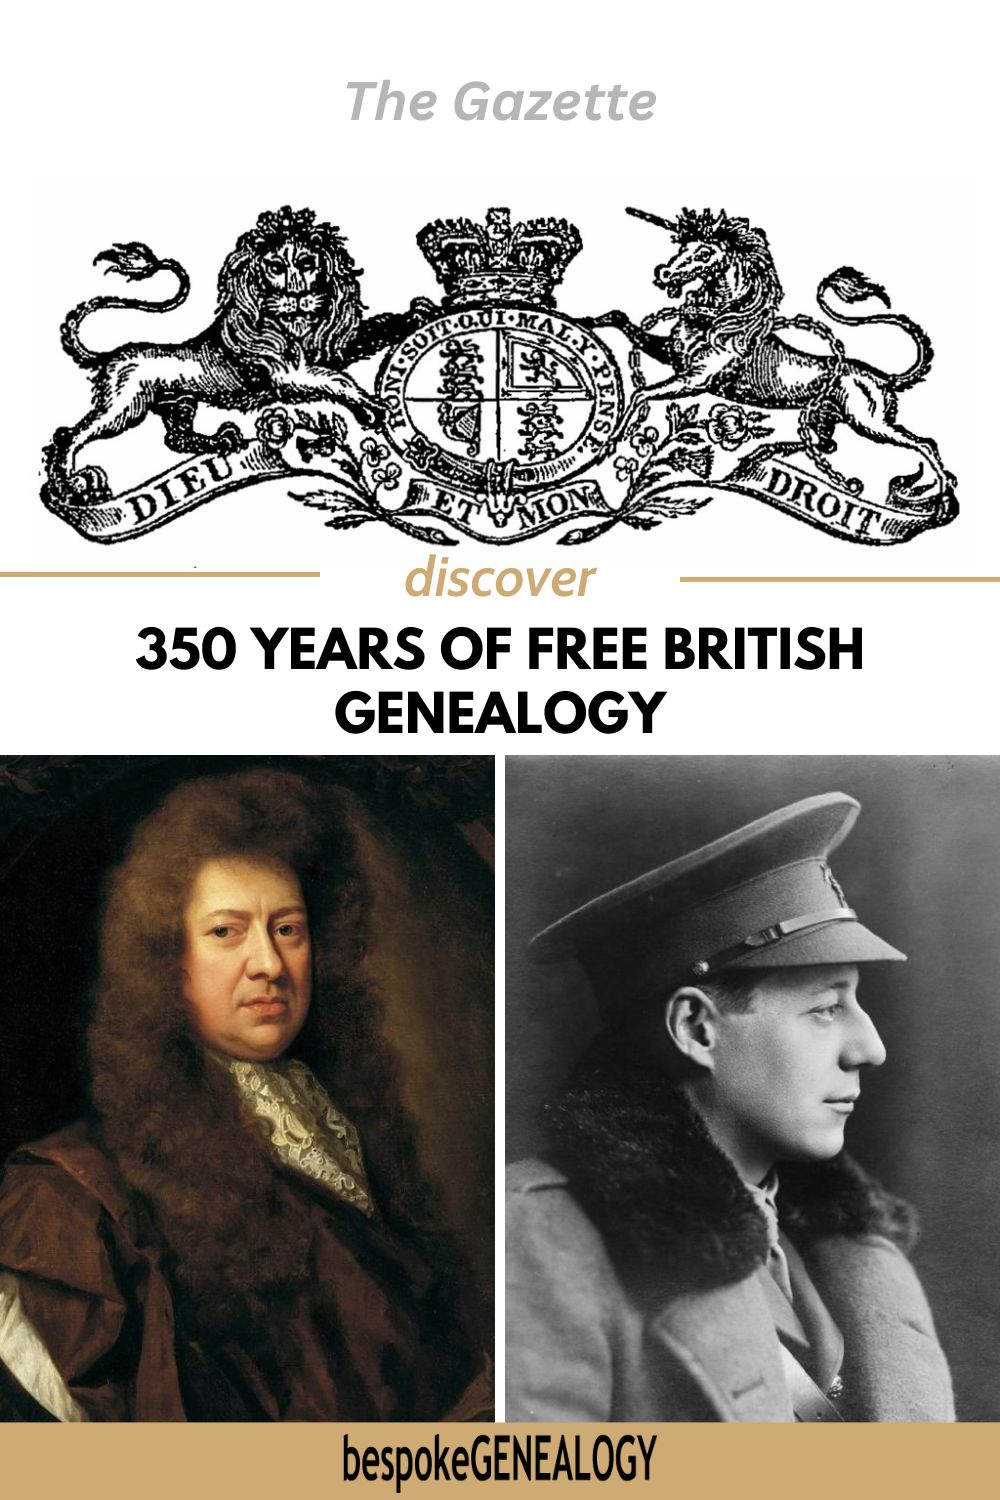 Discover 350 years of free British genealogy. Images of the Gazette masthead, a painting of Samuel Pepys and a photo of a World War One British officer.